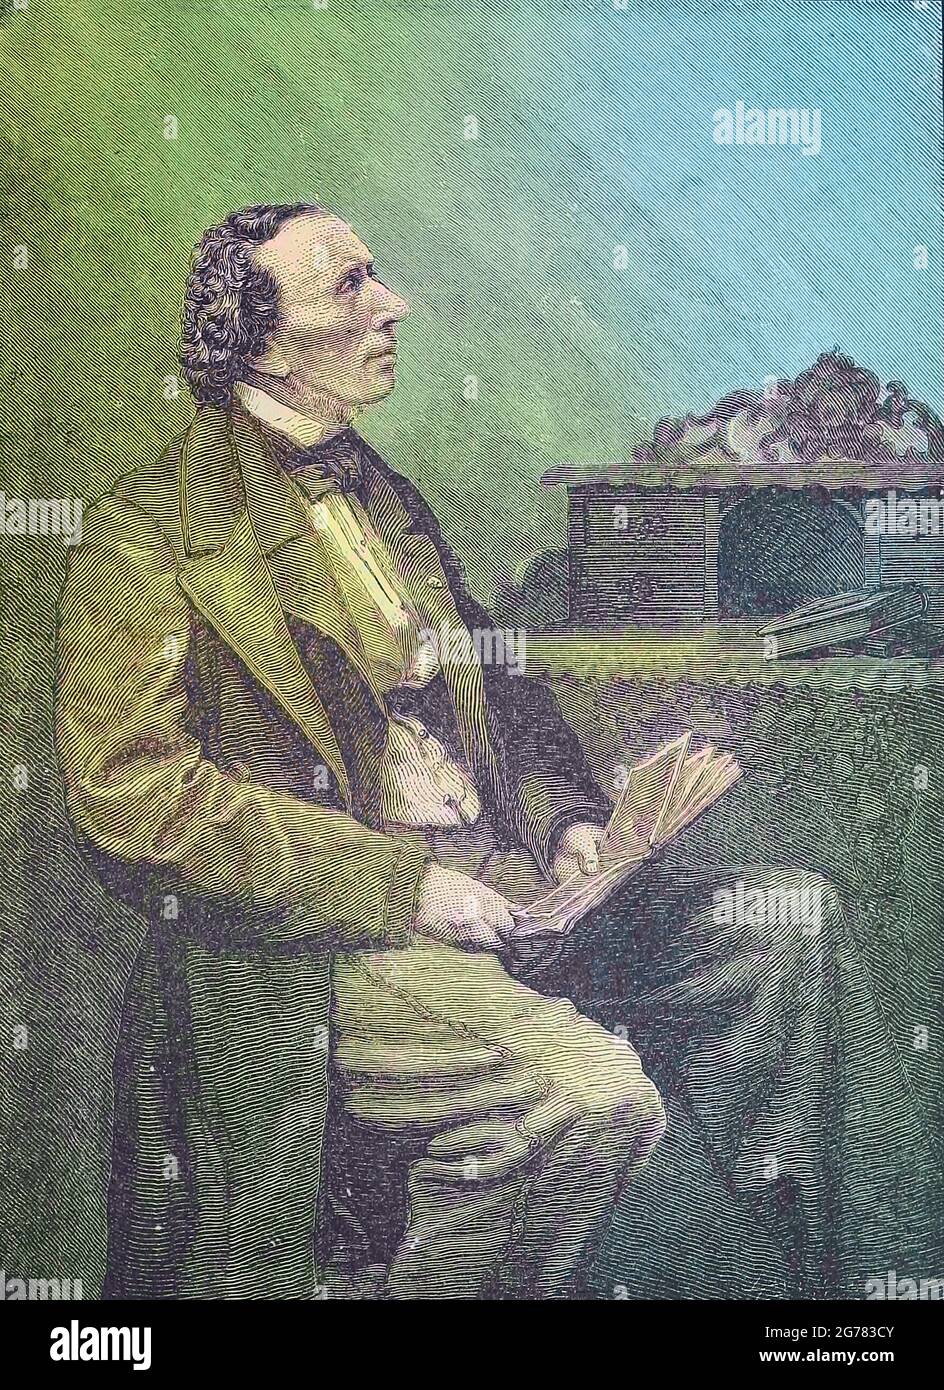 Machine colorized image of Hans Christian Andersen (2 April 1805 – 4 August 1875), in Denmark, was a Danish author. Although a prolific writer of plays, travelogues, novels, and poems, he is best remembered for his fairy tales. From the book ' The viking Bodleys; an excursion into Norway and Denmark ' by Horace Elisha Scudder Published in Boston, by Houghton, Mifflin and Company in 1885 from the BODLEY FAMILY series of books Stock Photo